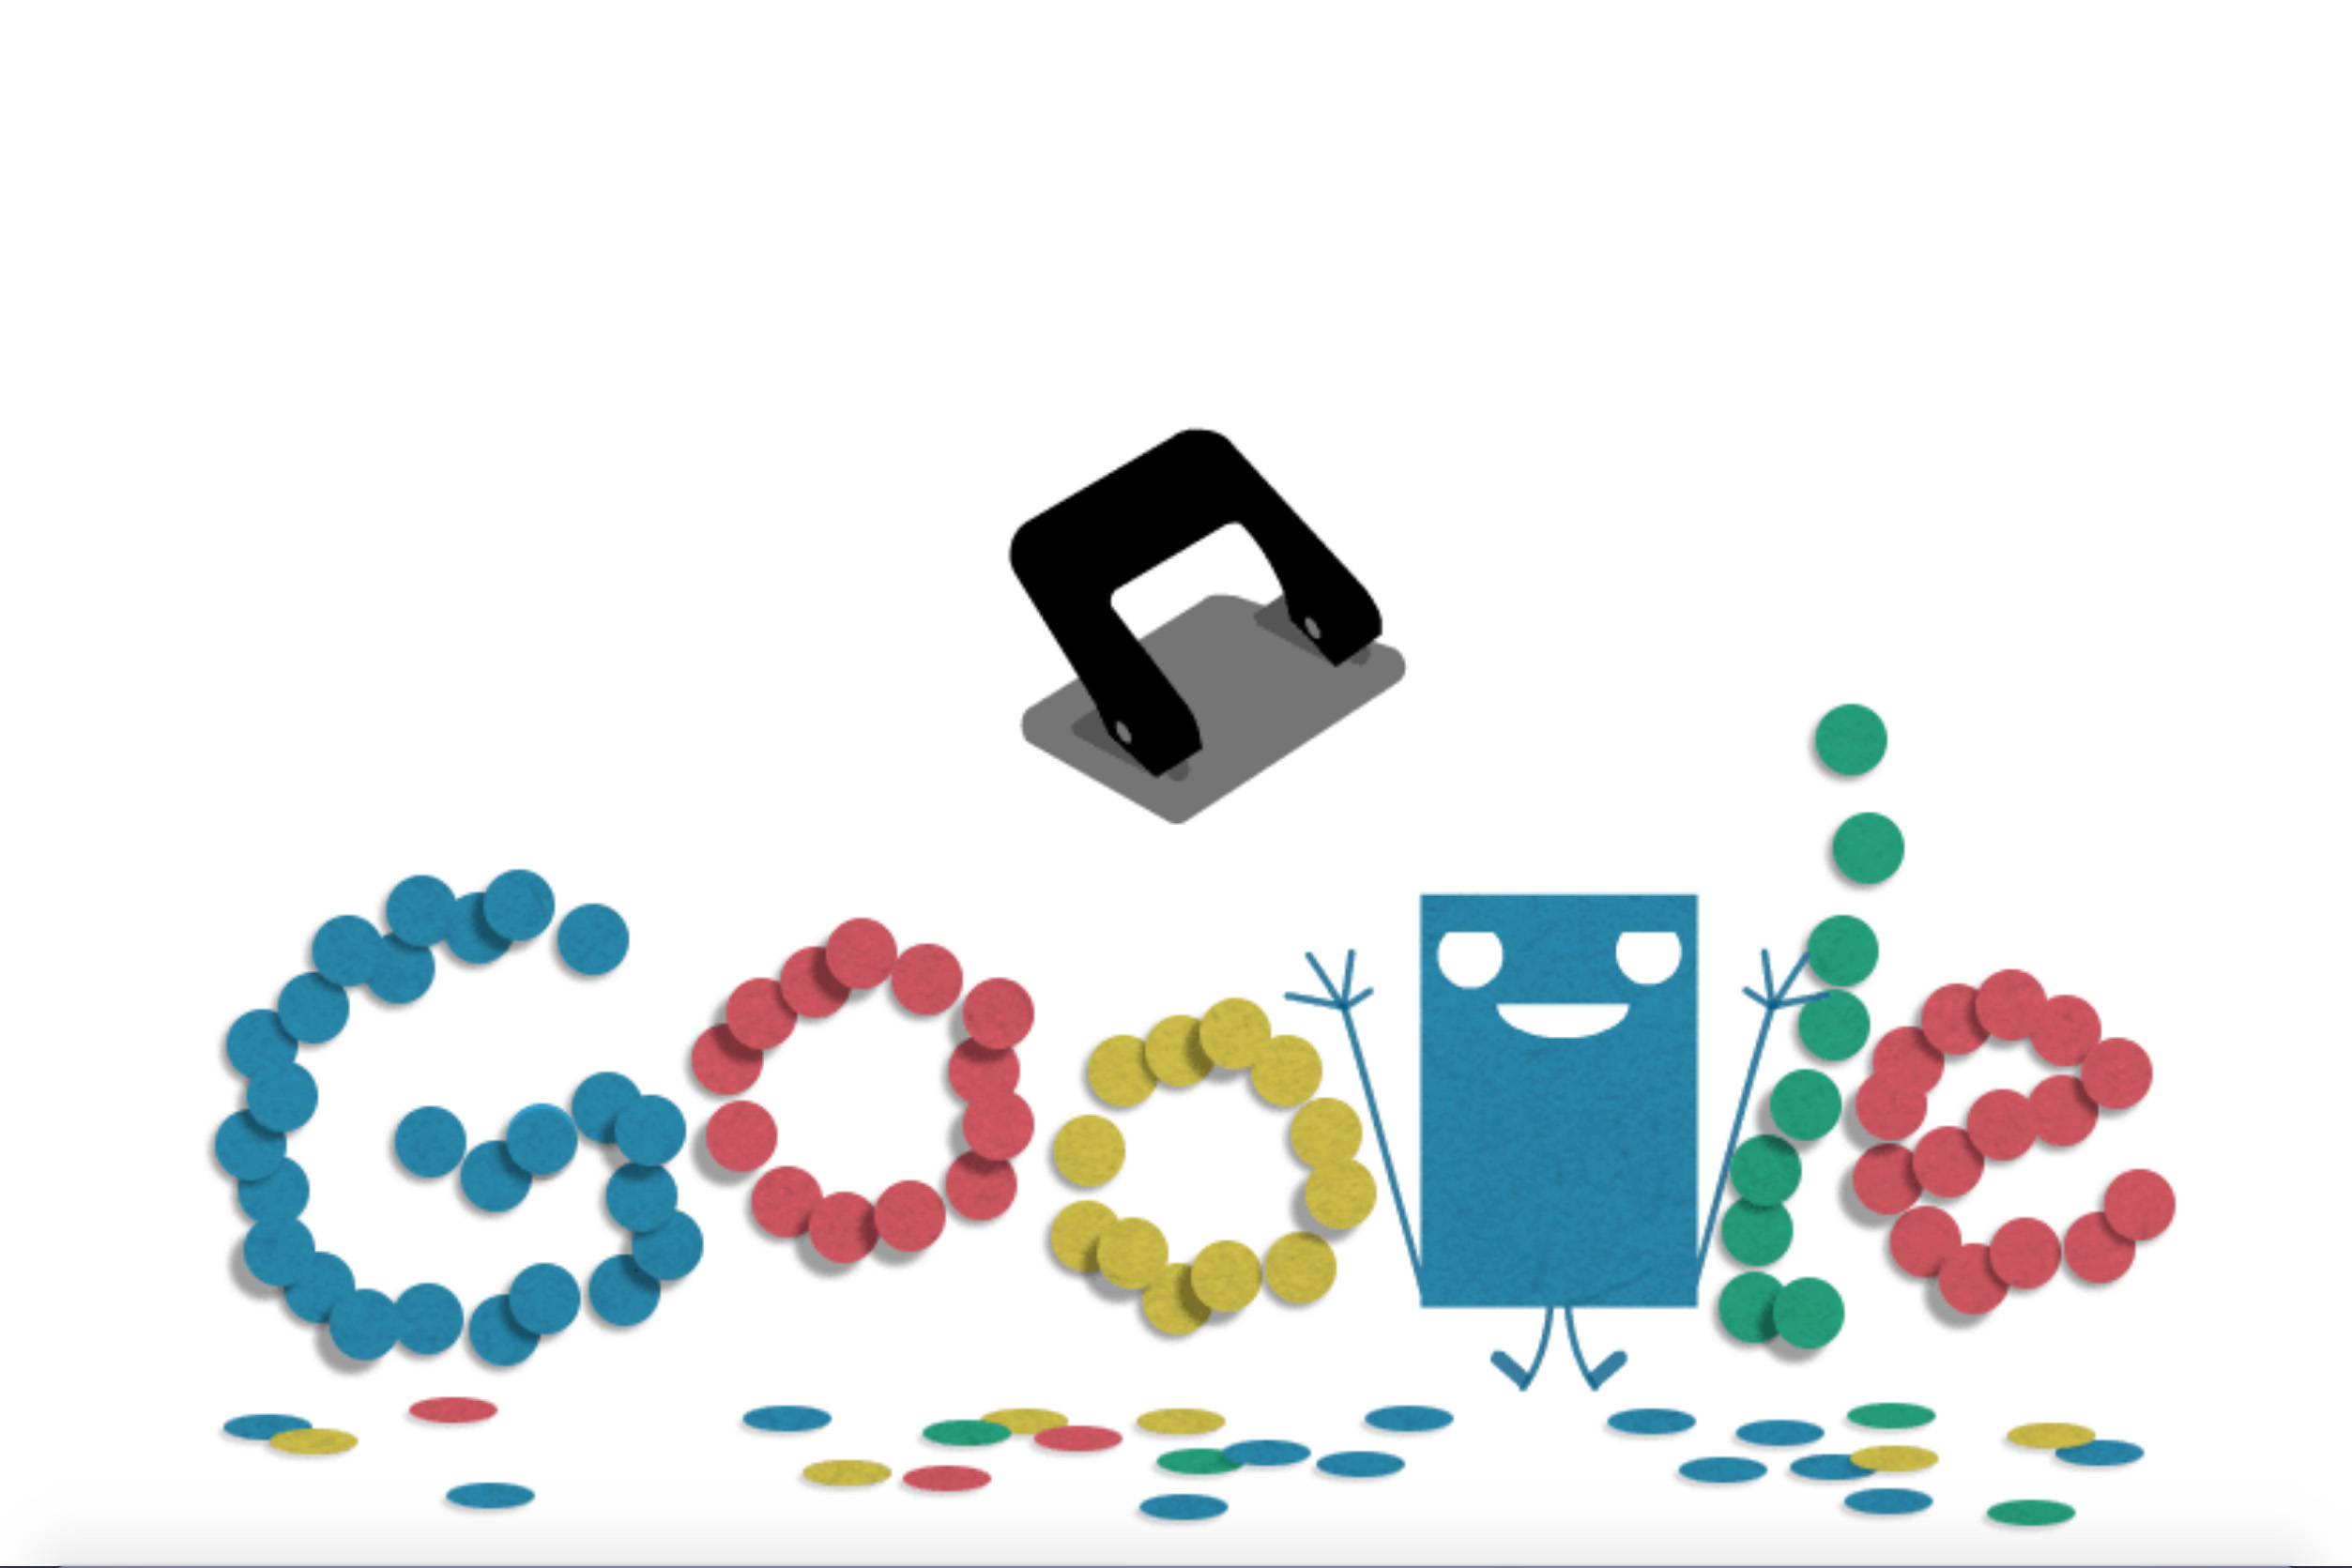 doodle of google today